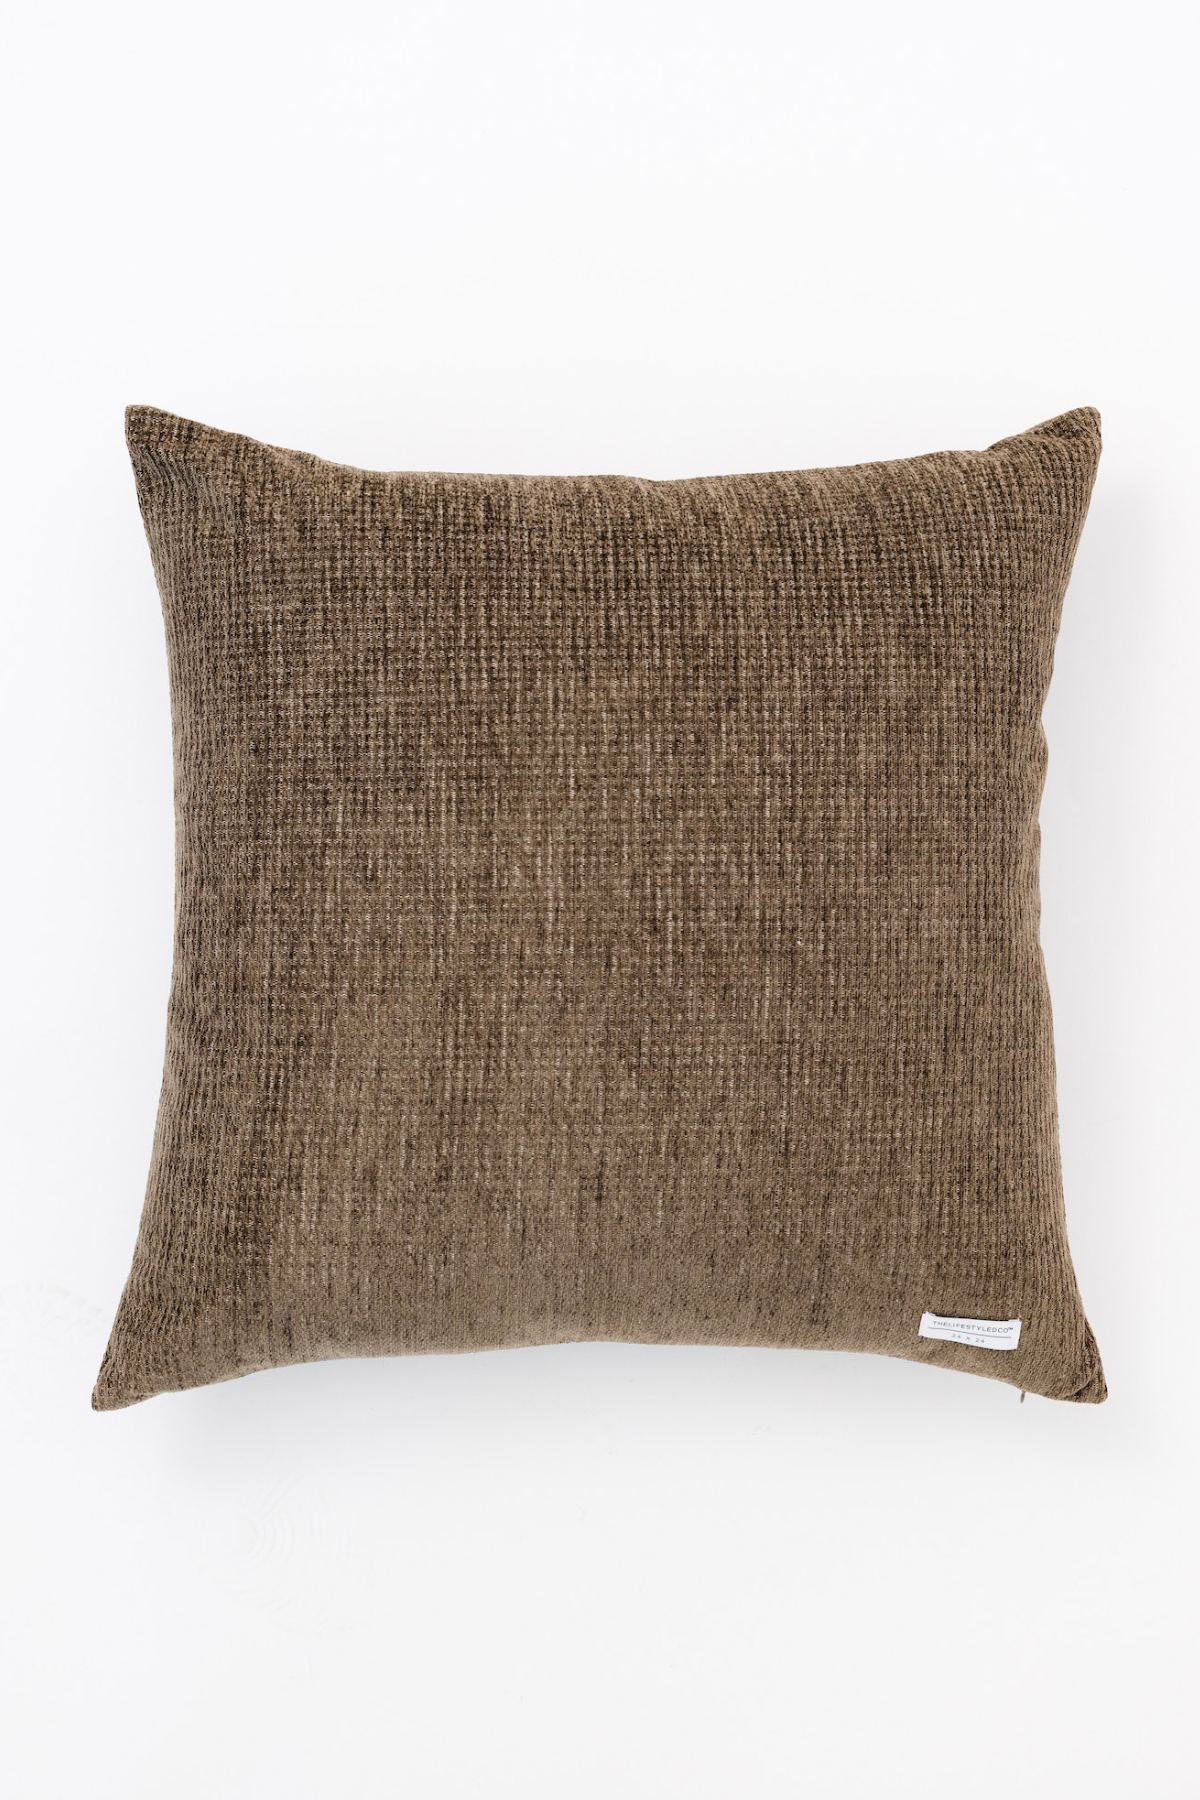 Tobias Chenille Houndstooth Pillow - Olive - 2 Sizes